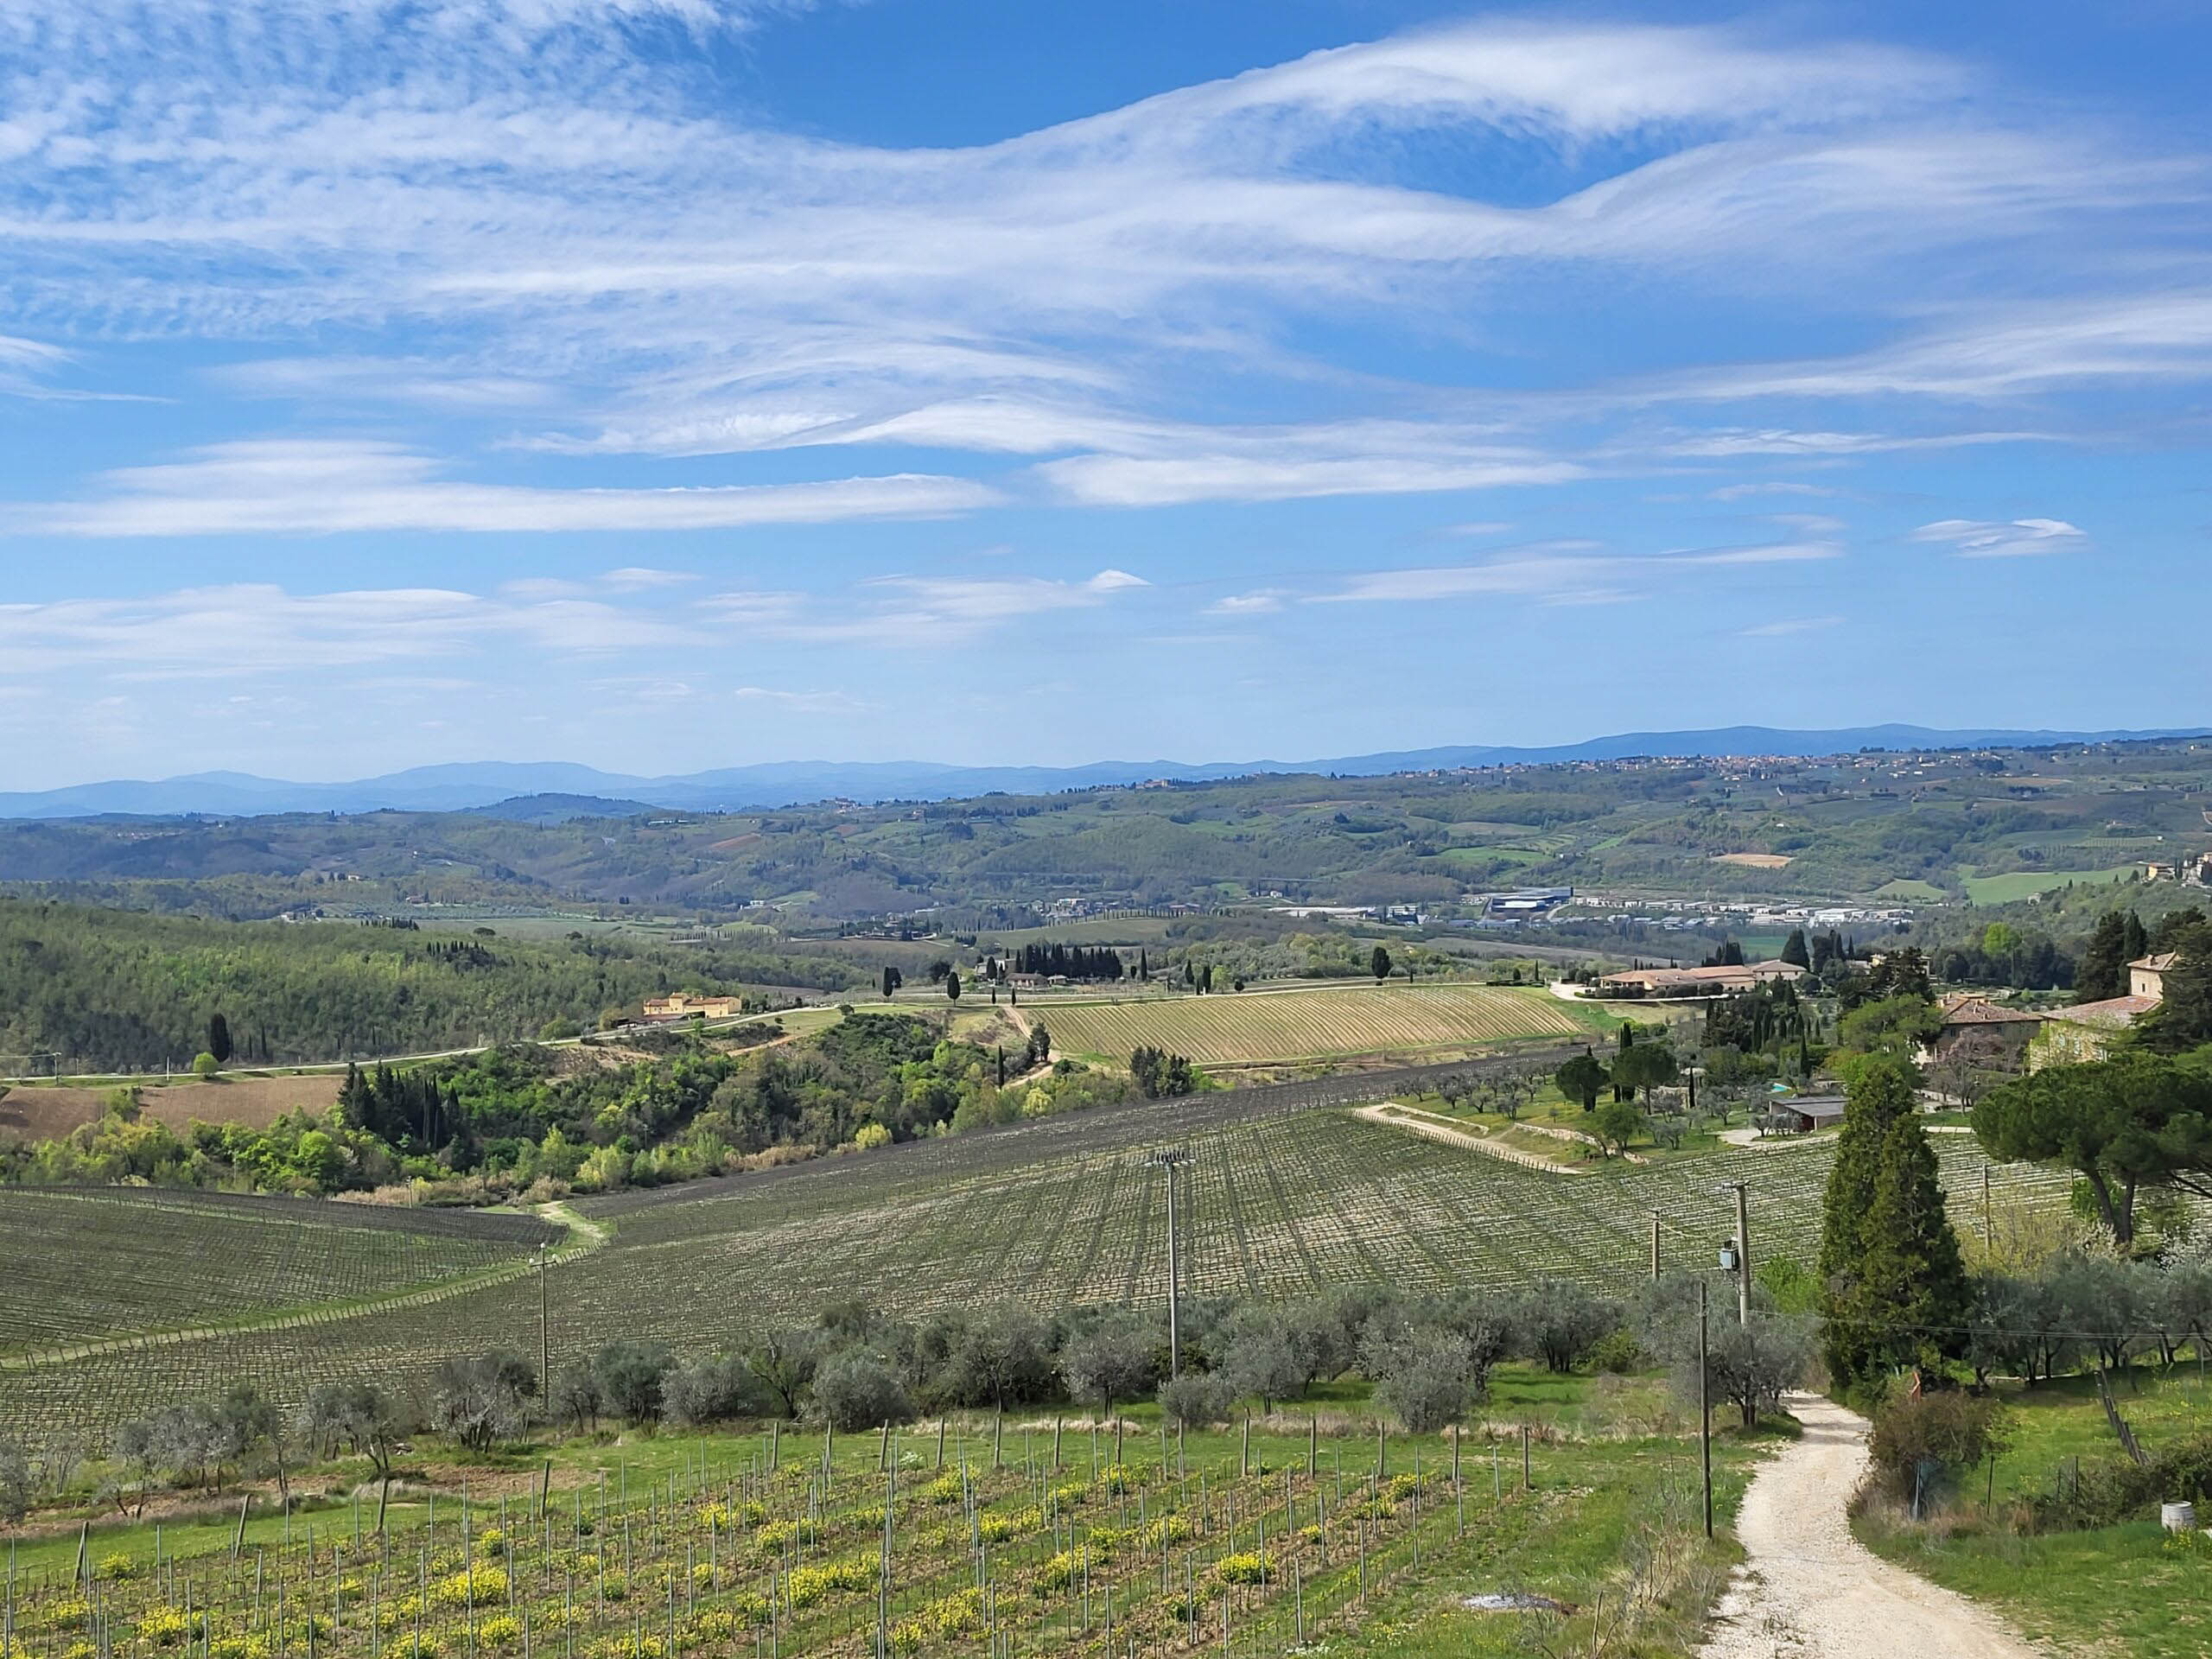 The Rural Life of Tuscany (Toscana): Small Town Clusters & Villas